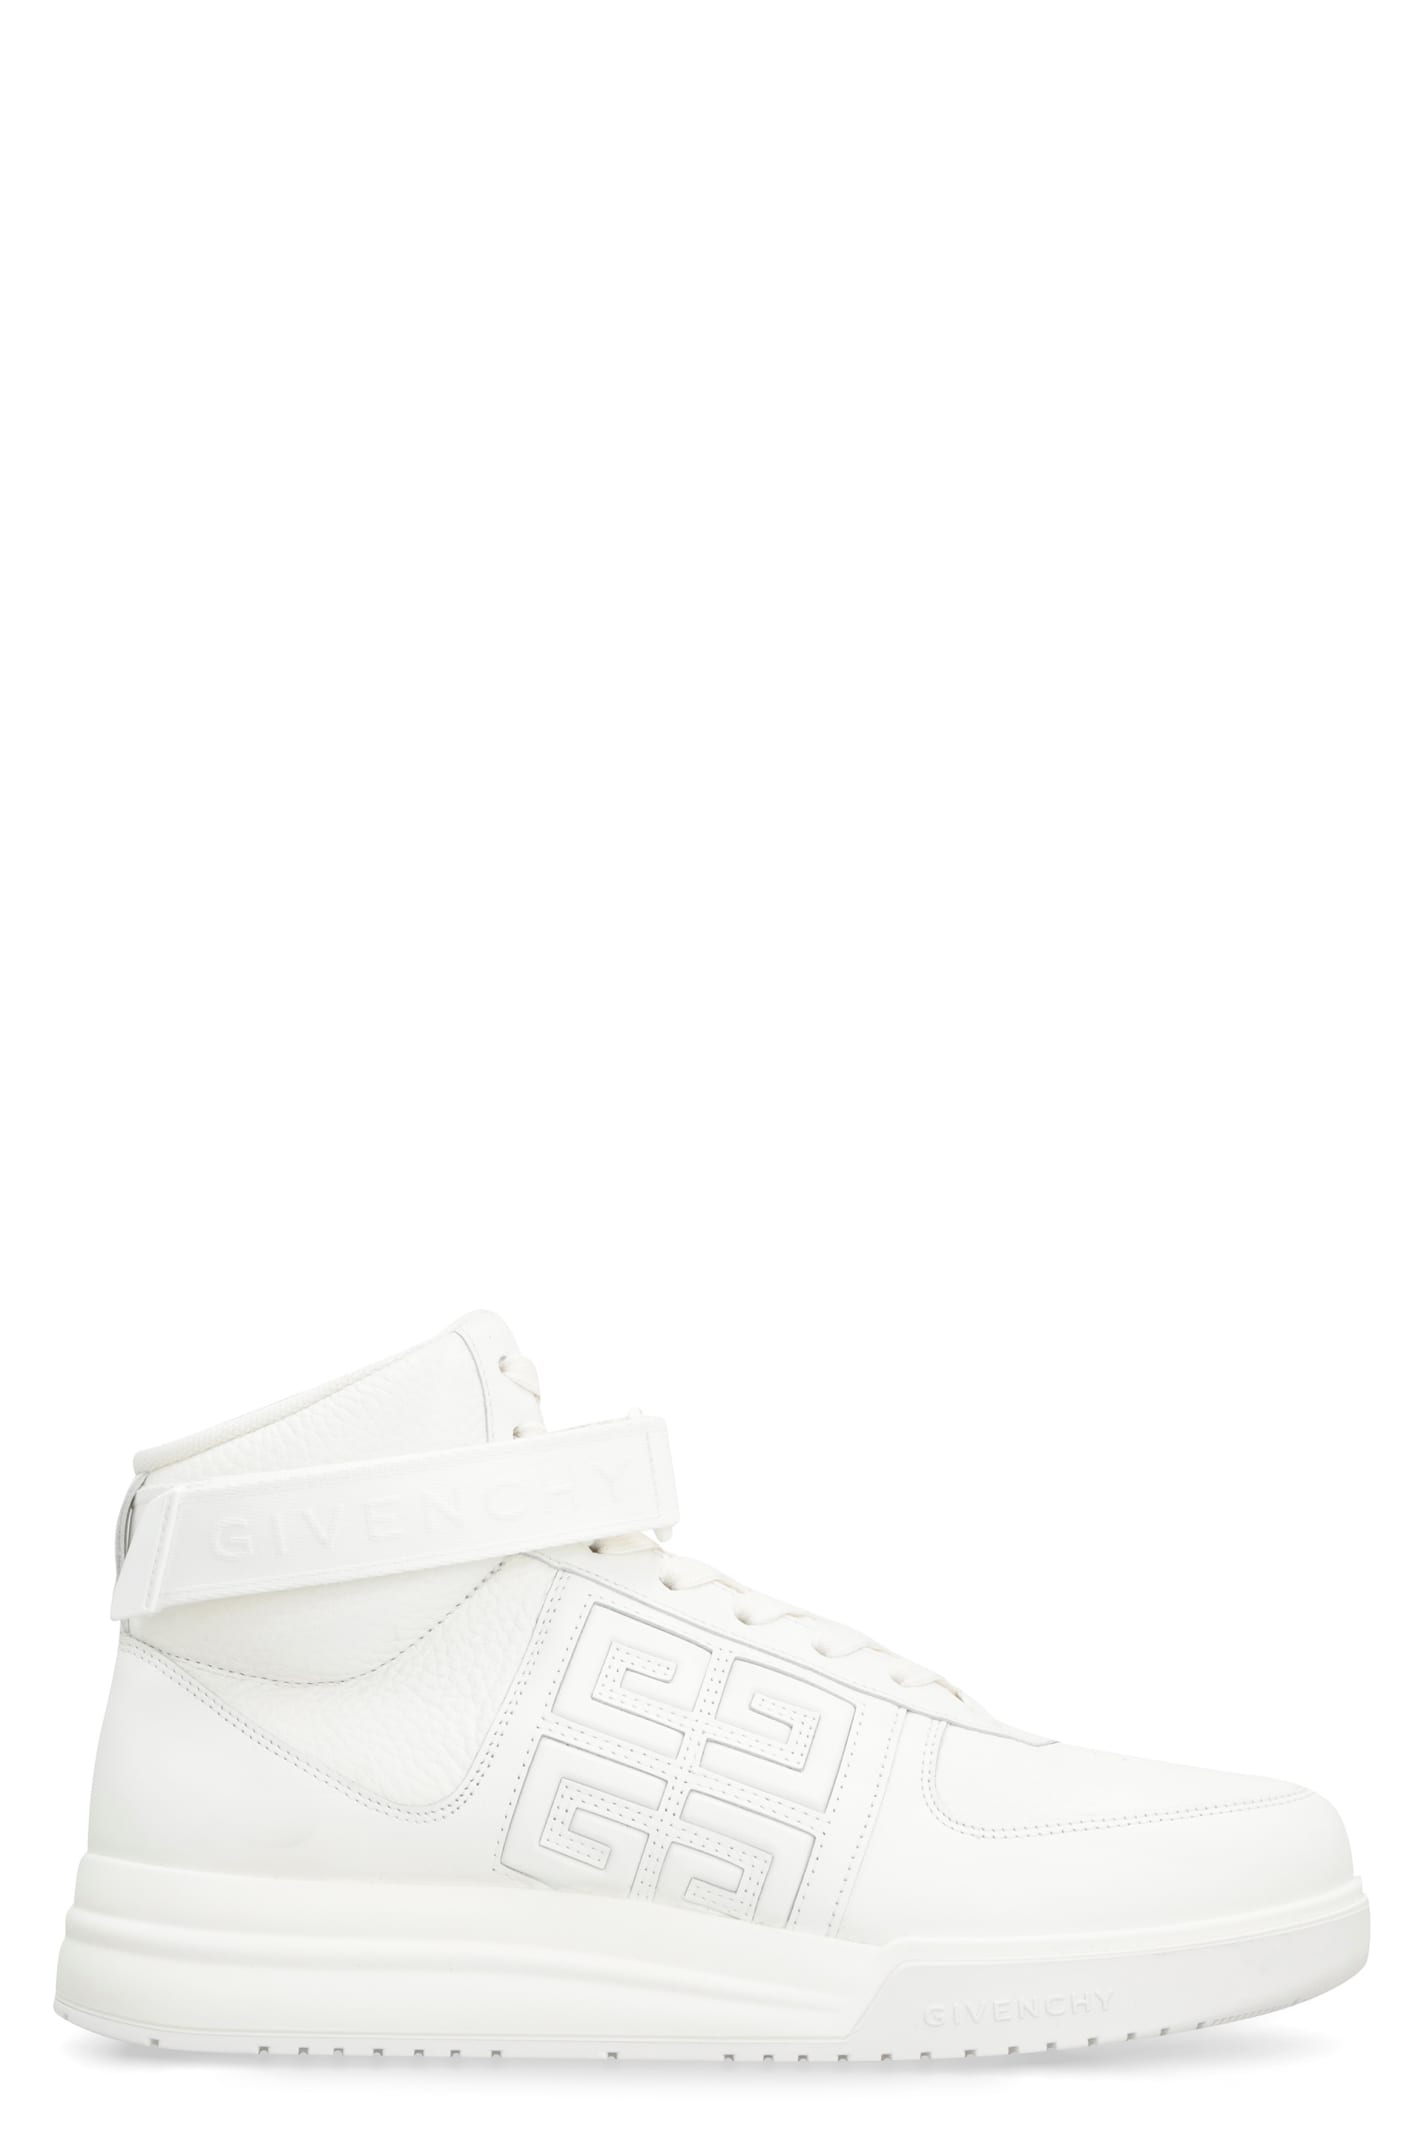 Givenchy G4 Leather High-top Sneakers In White